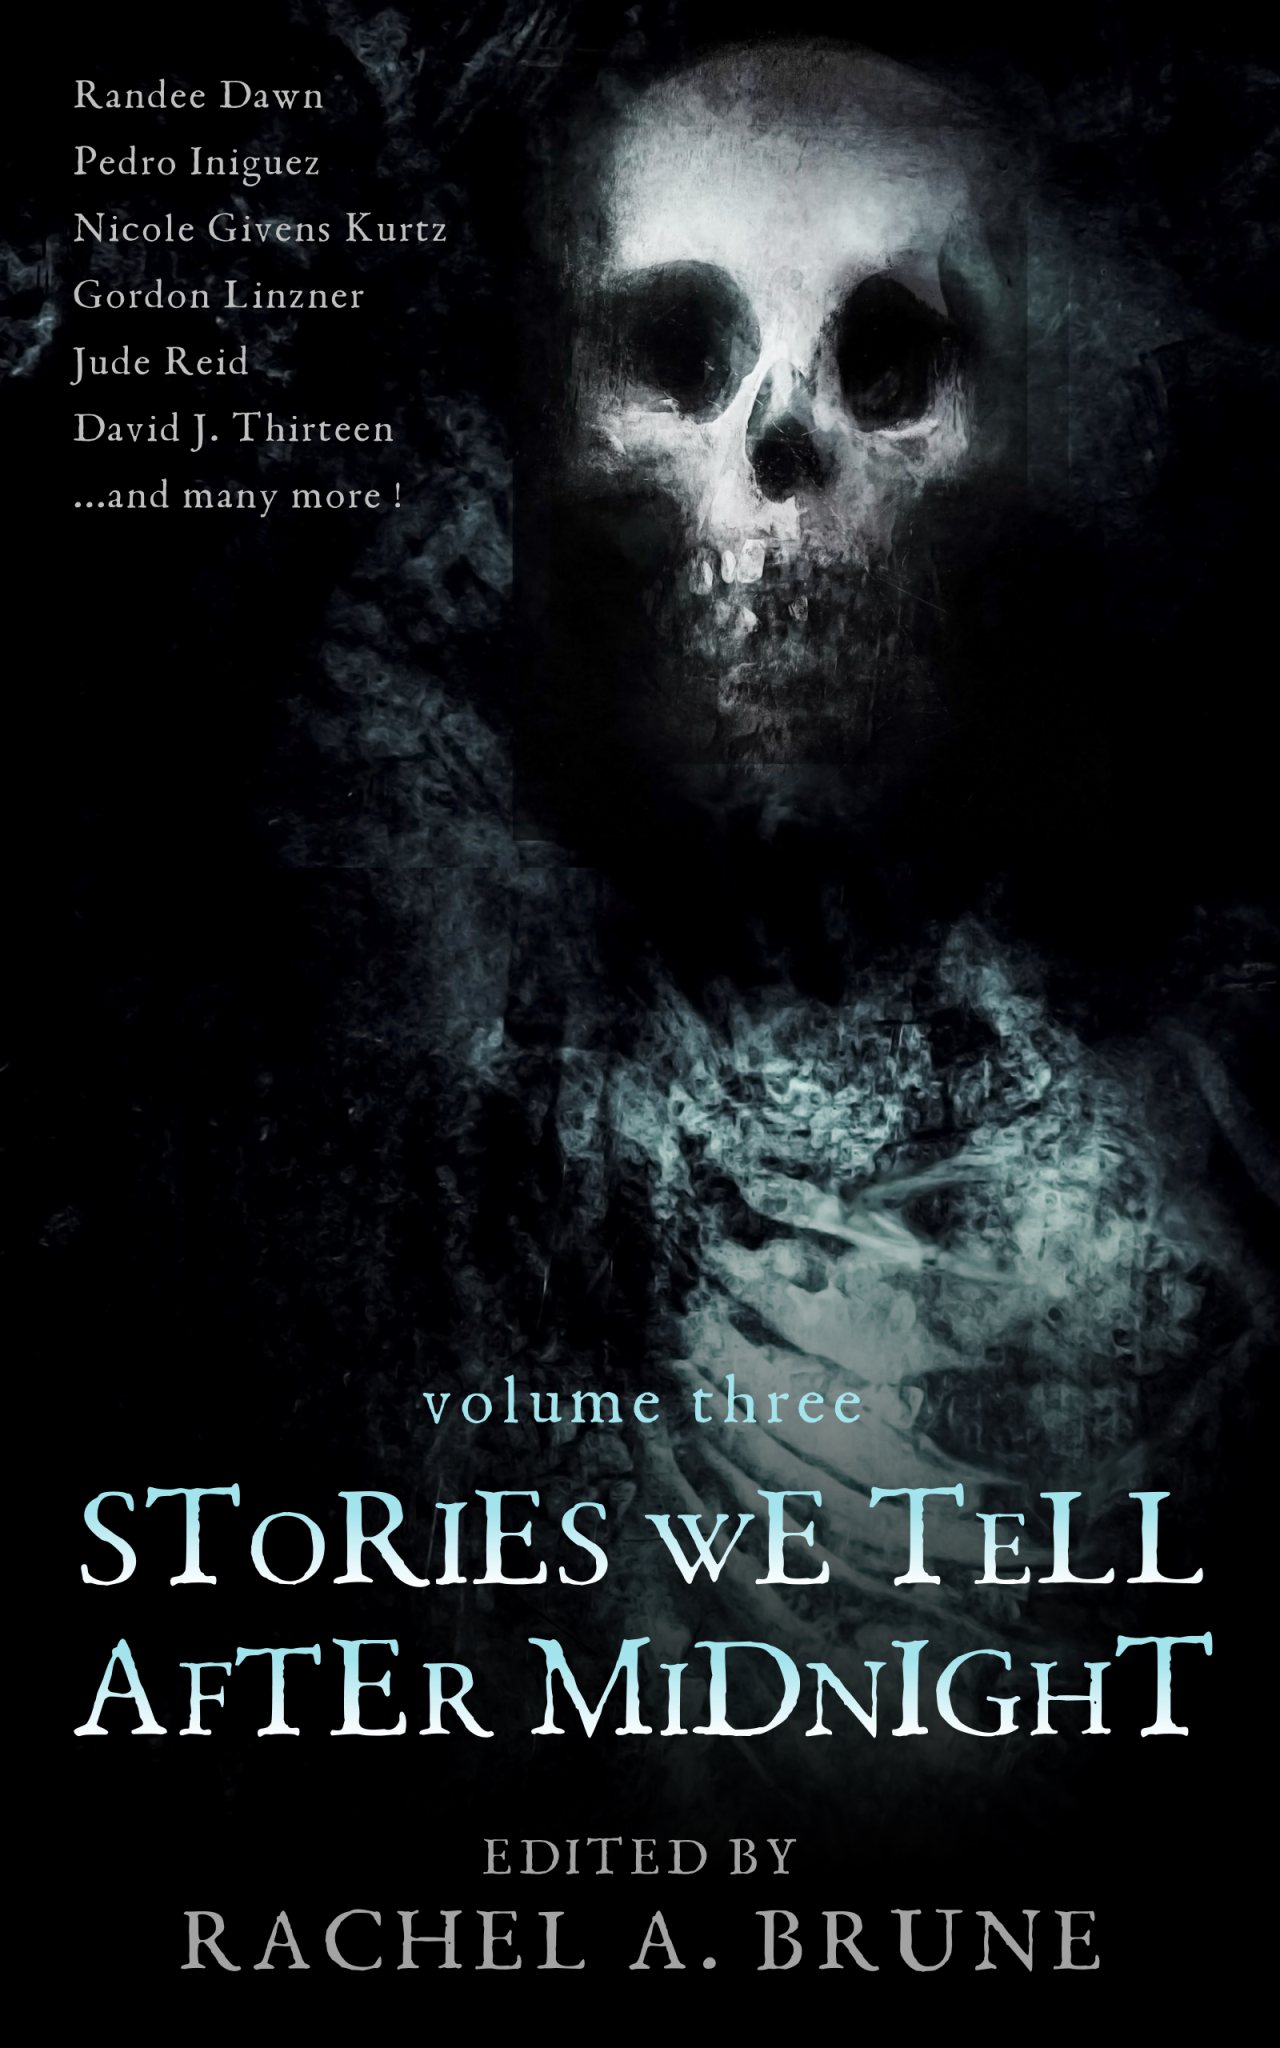 Book cover for Stories We Tell After Midnight Volume Three with list of authors, title, edited by Rachel A. Brune and an image of a skull and skeleton fading into the black background